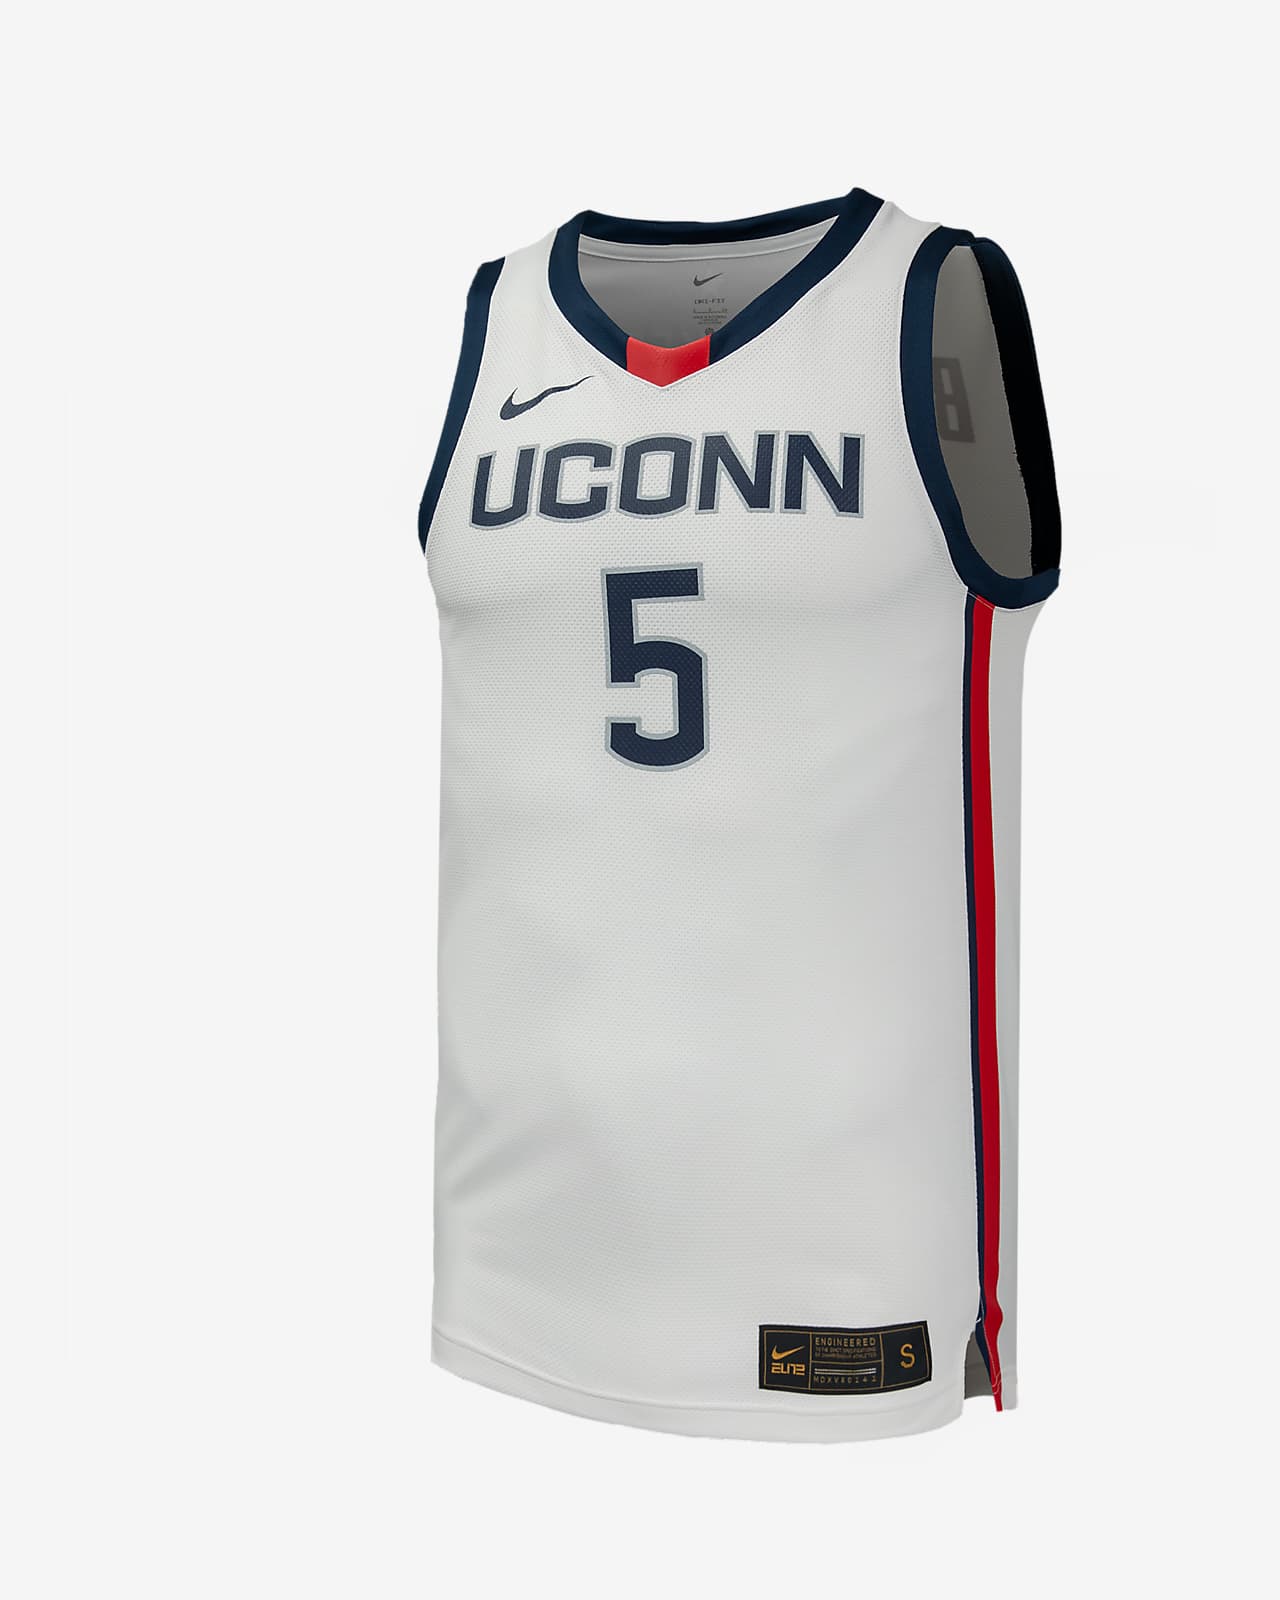 Paige Bueckers UConn 2023/24 Nike College Basketball Jersey